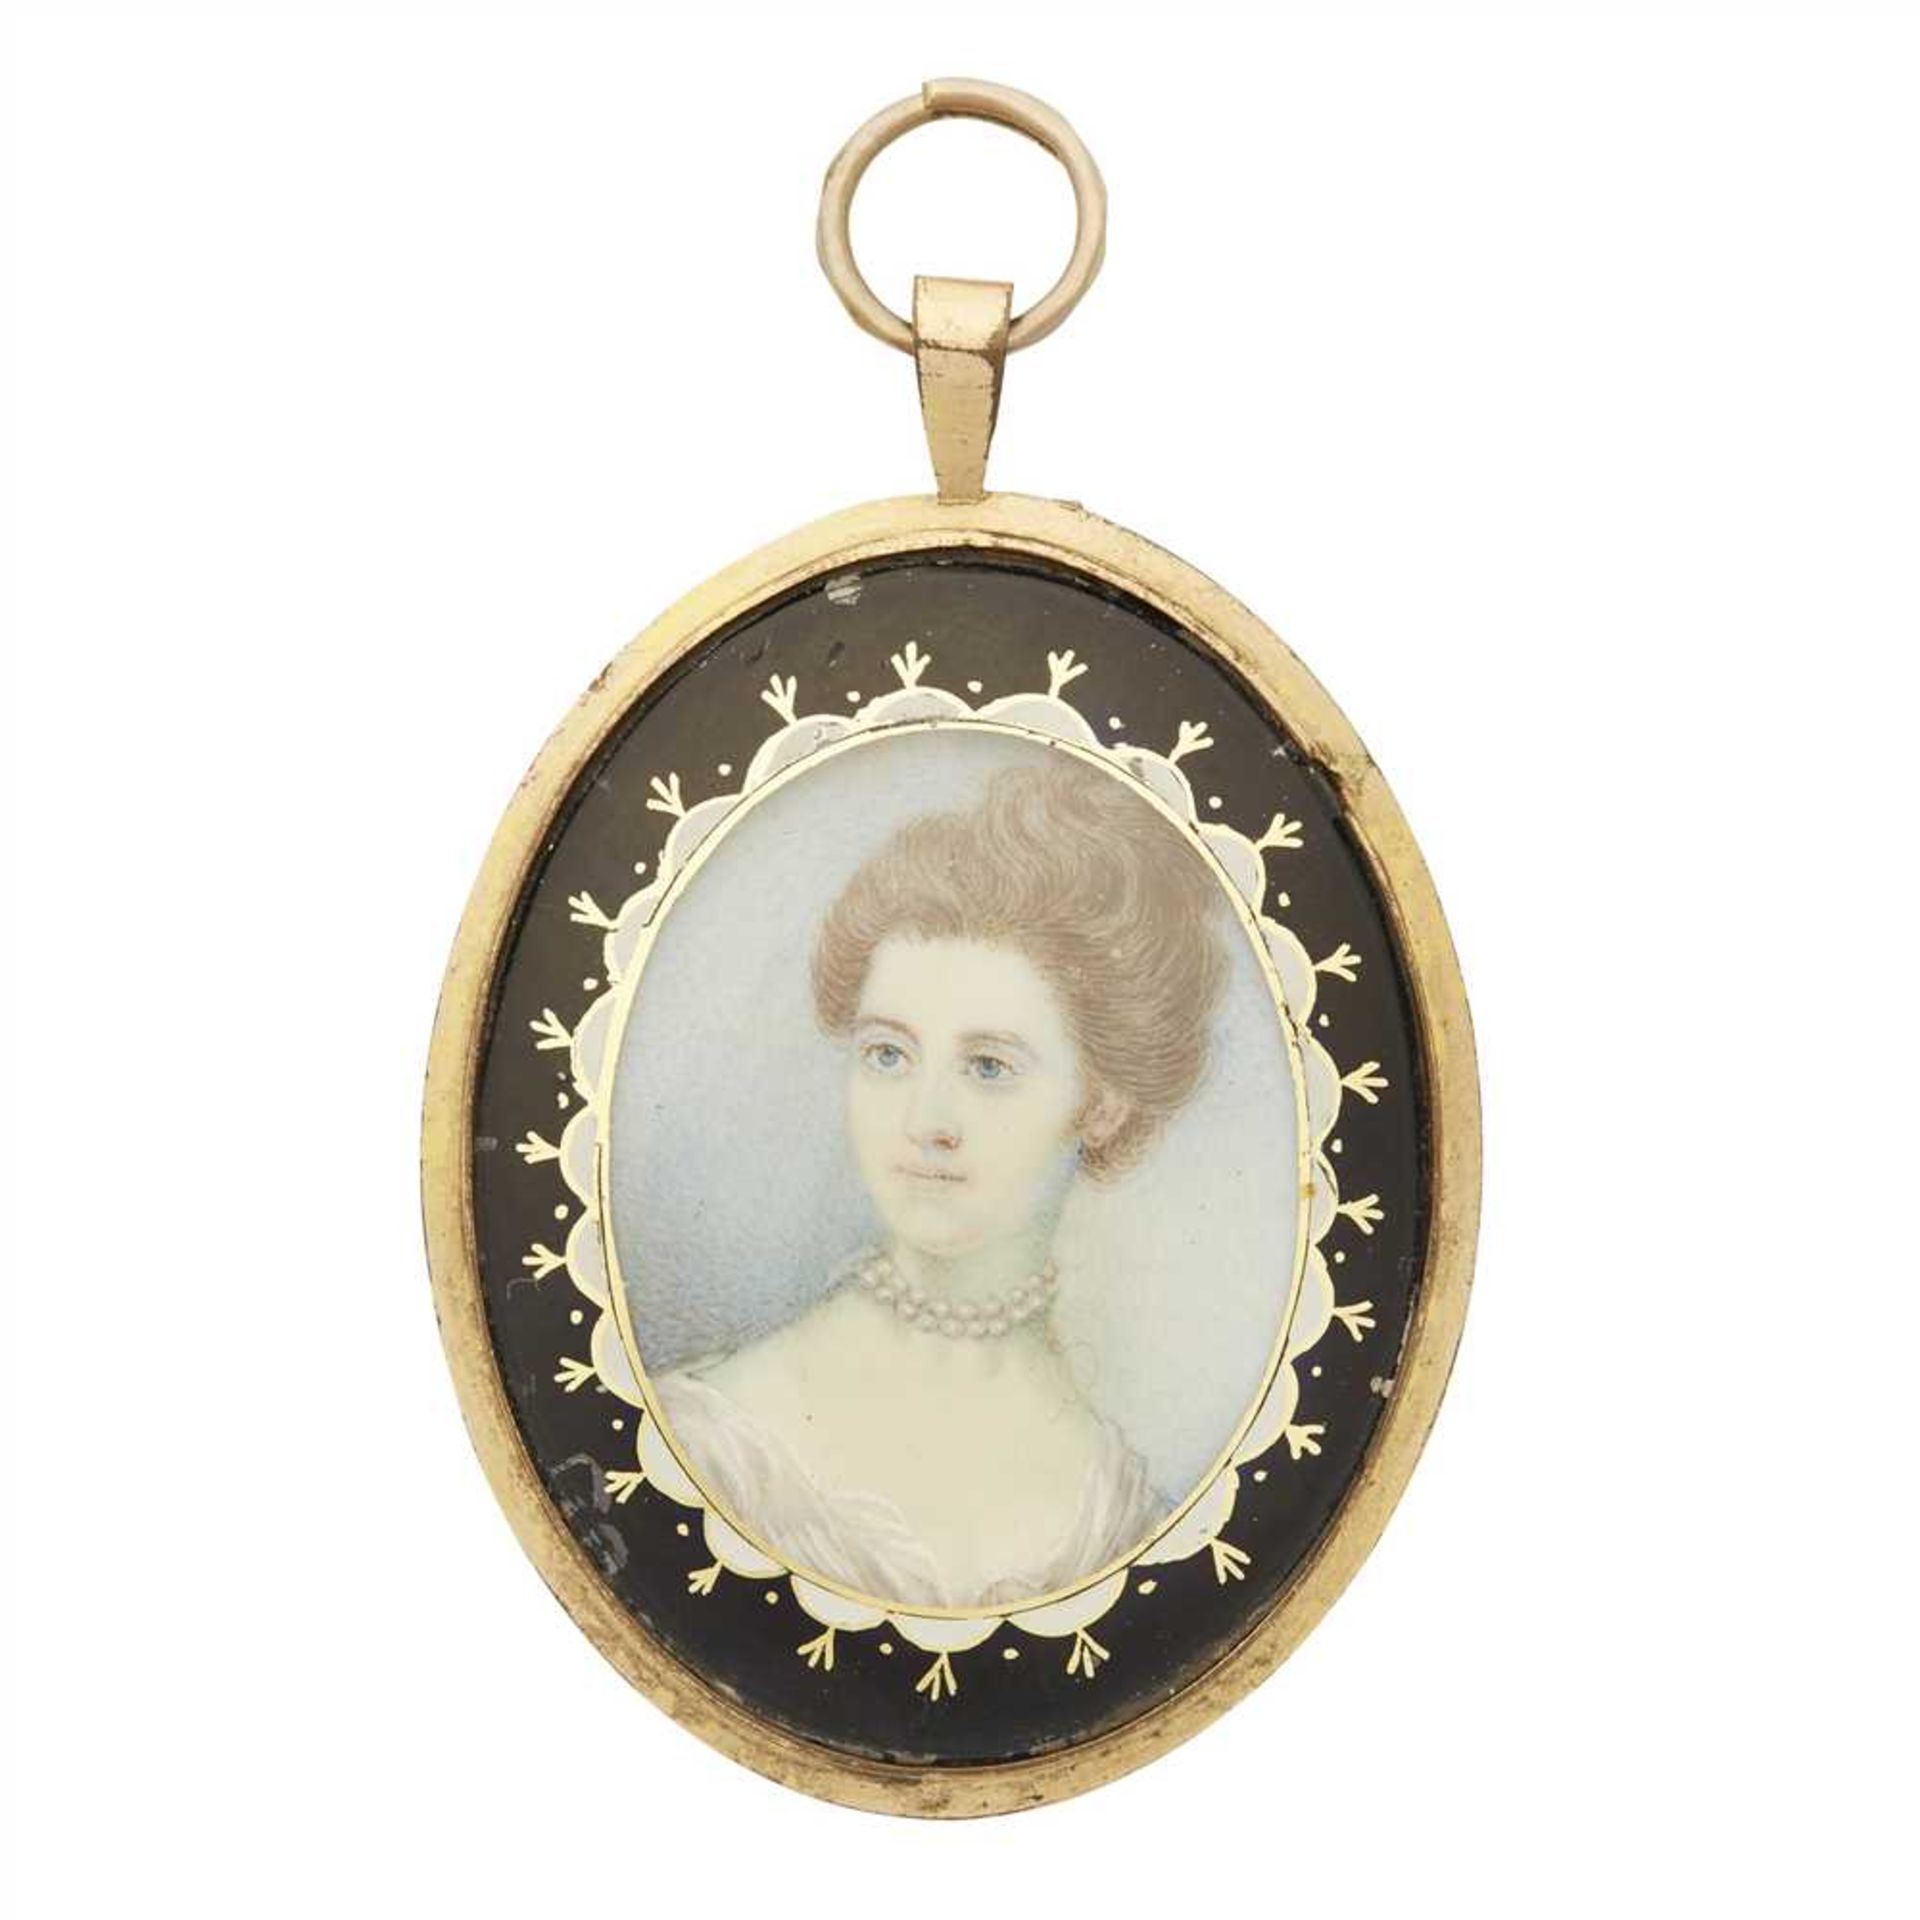 A Regency miniature presented in an oval frame with black enamel detail; together with a jet cameo - Image 3 of 3